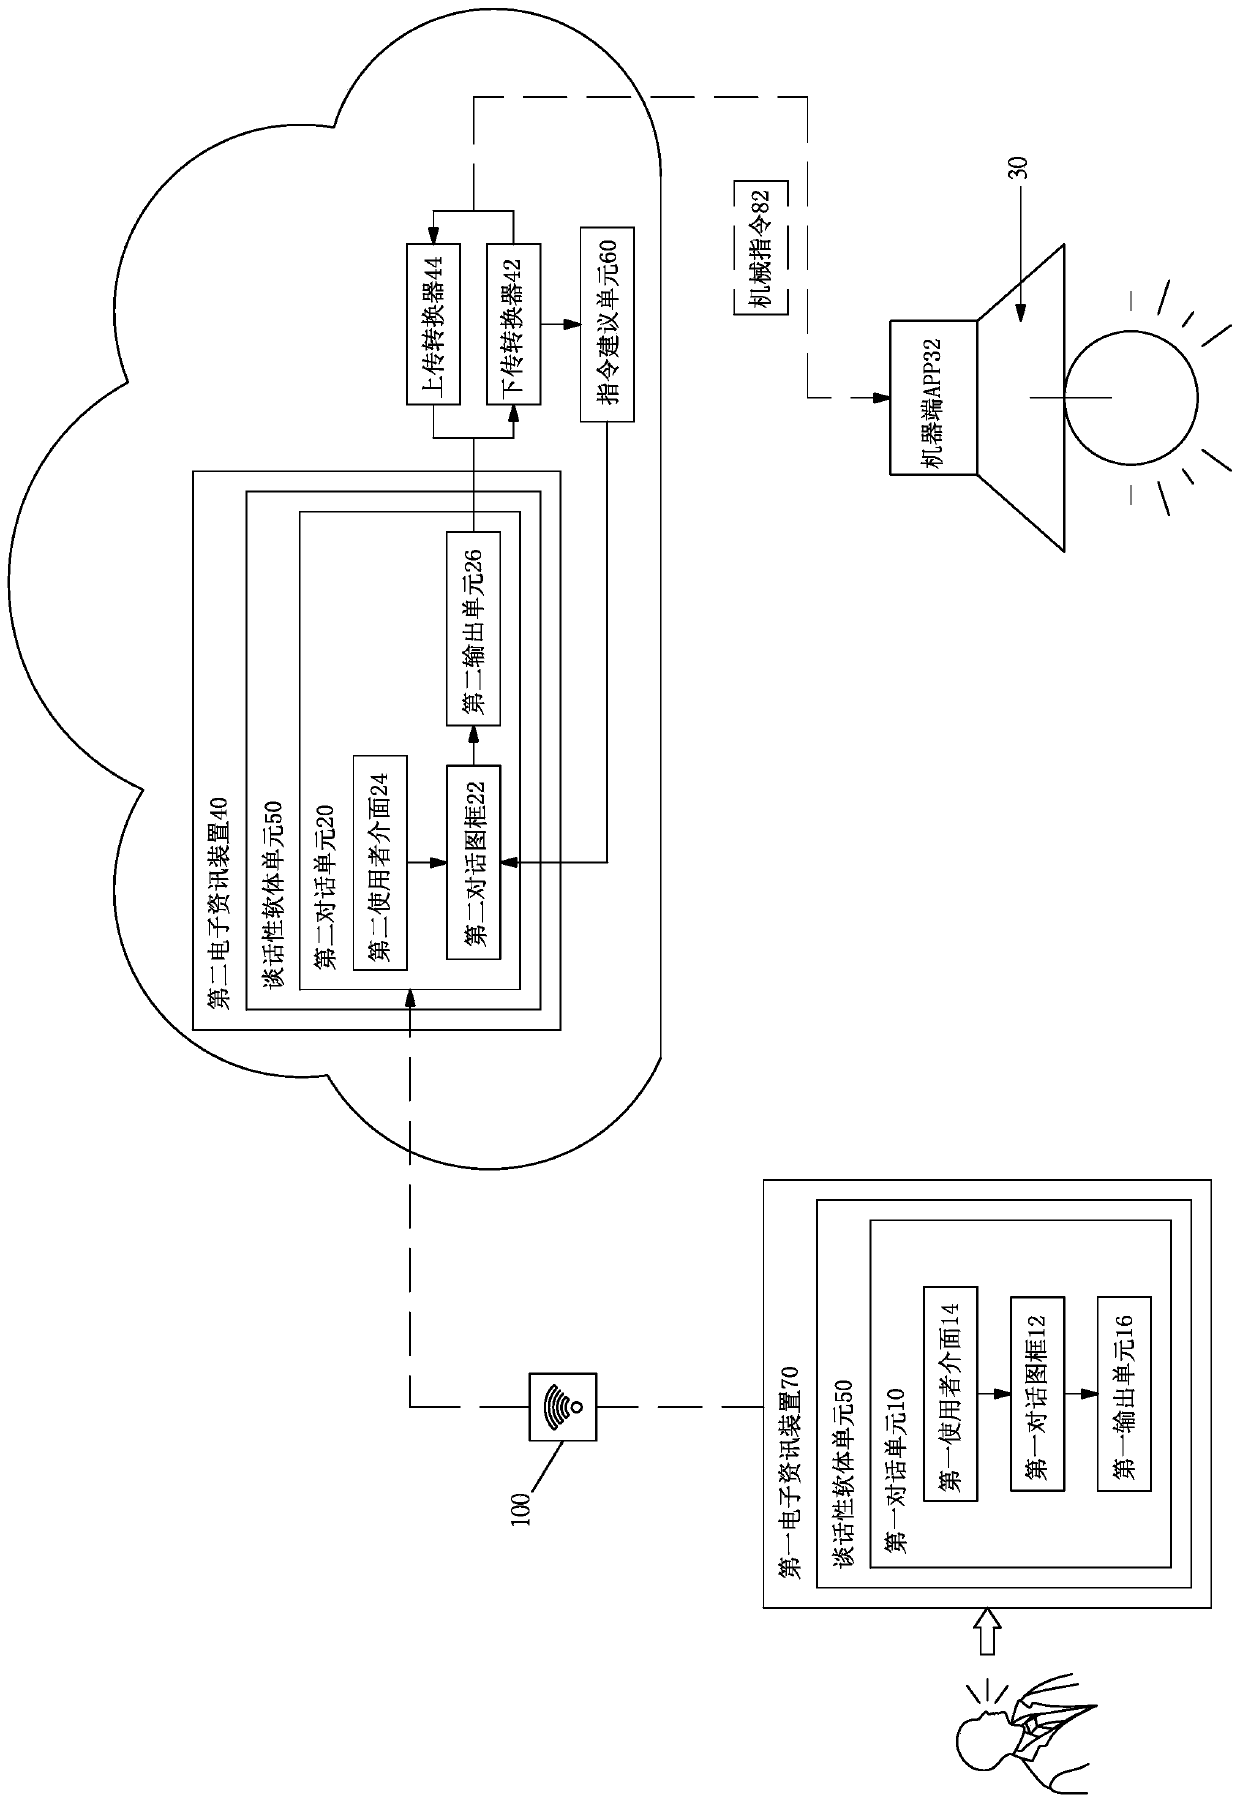 Mechanism for controlling physical machine by using conversational software